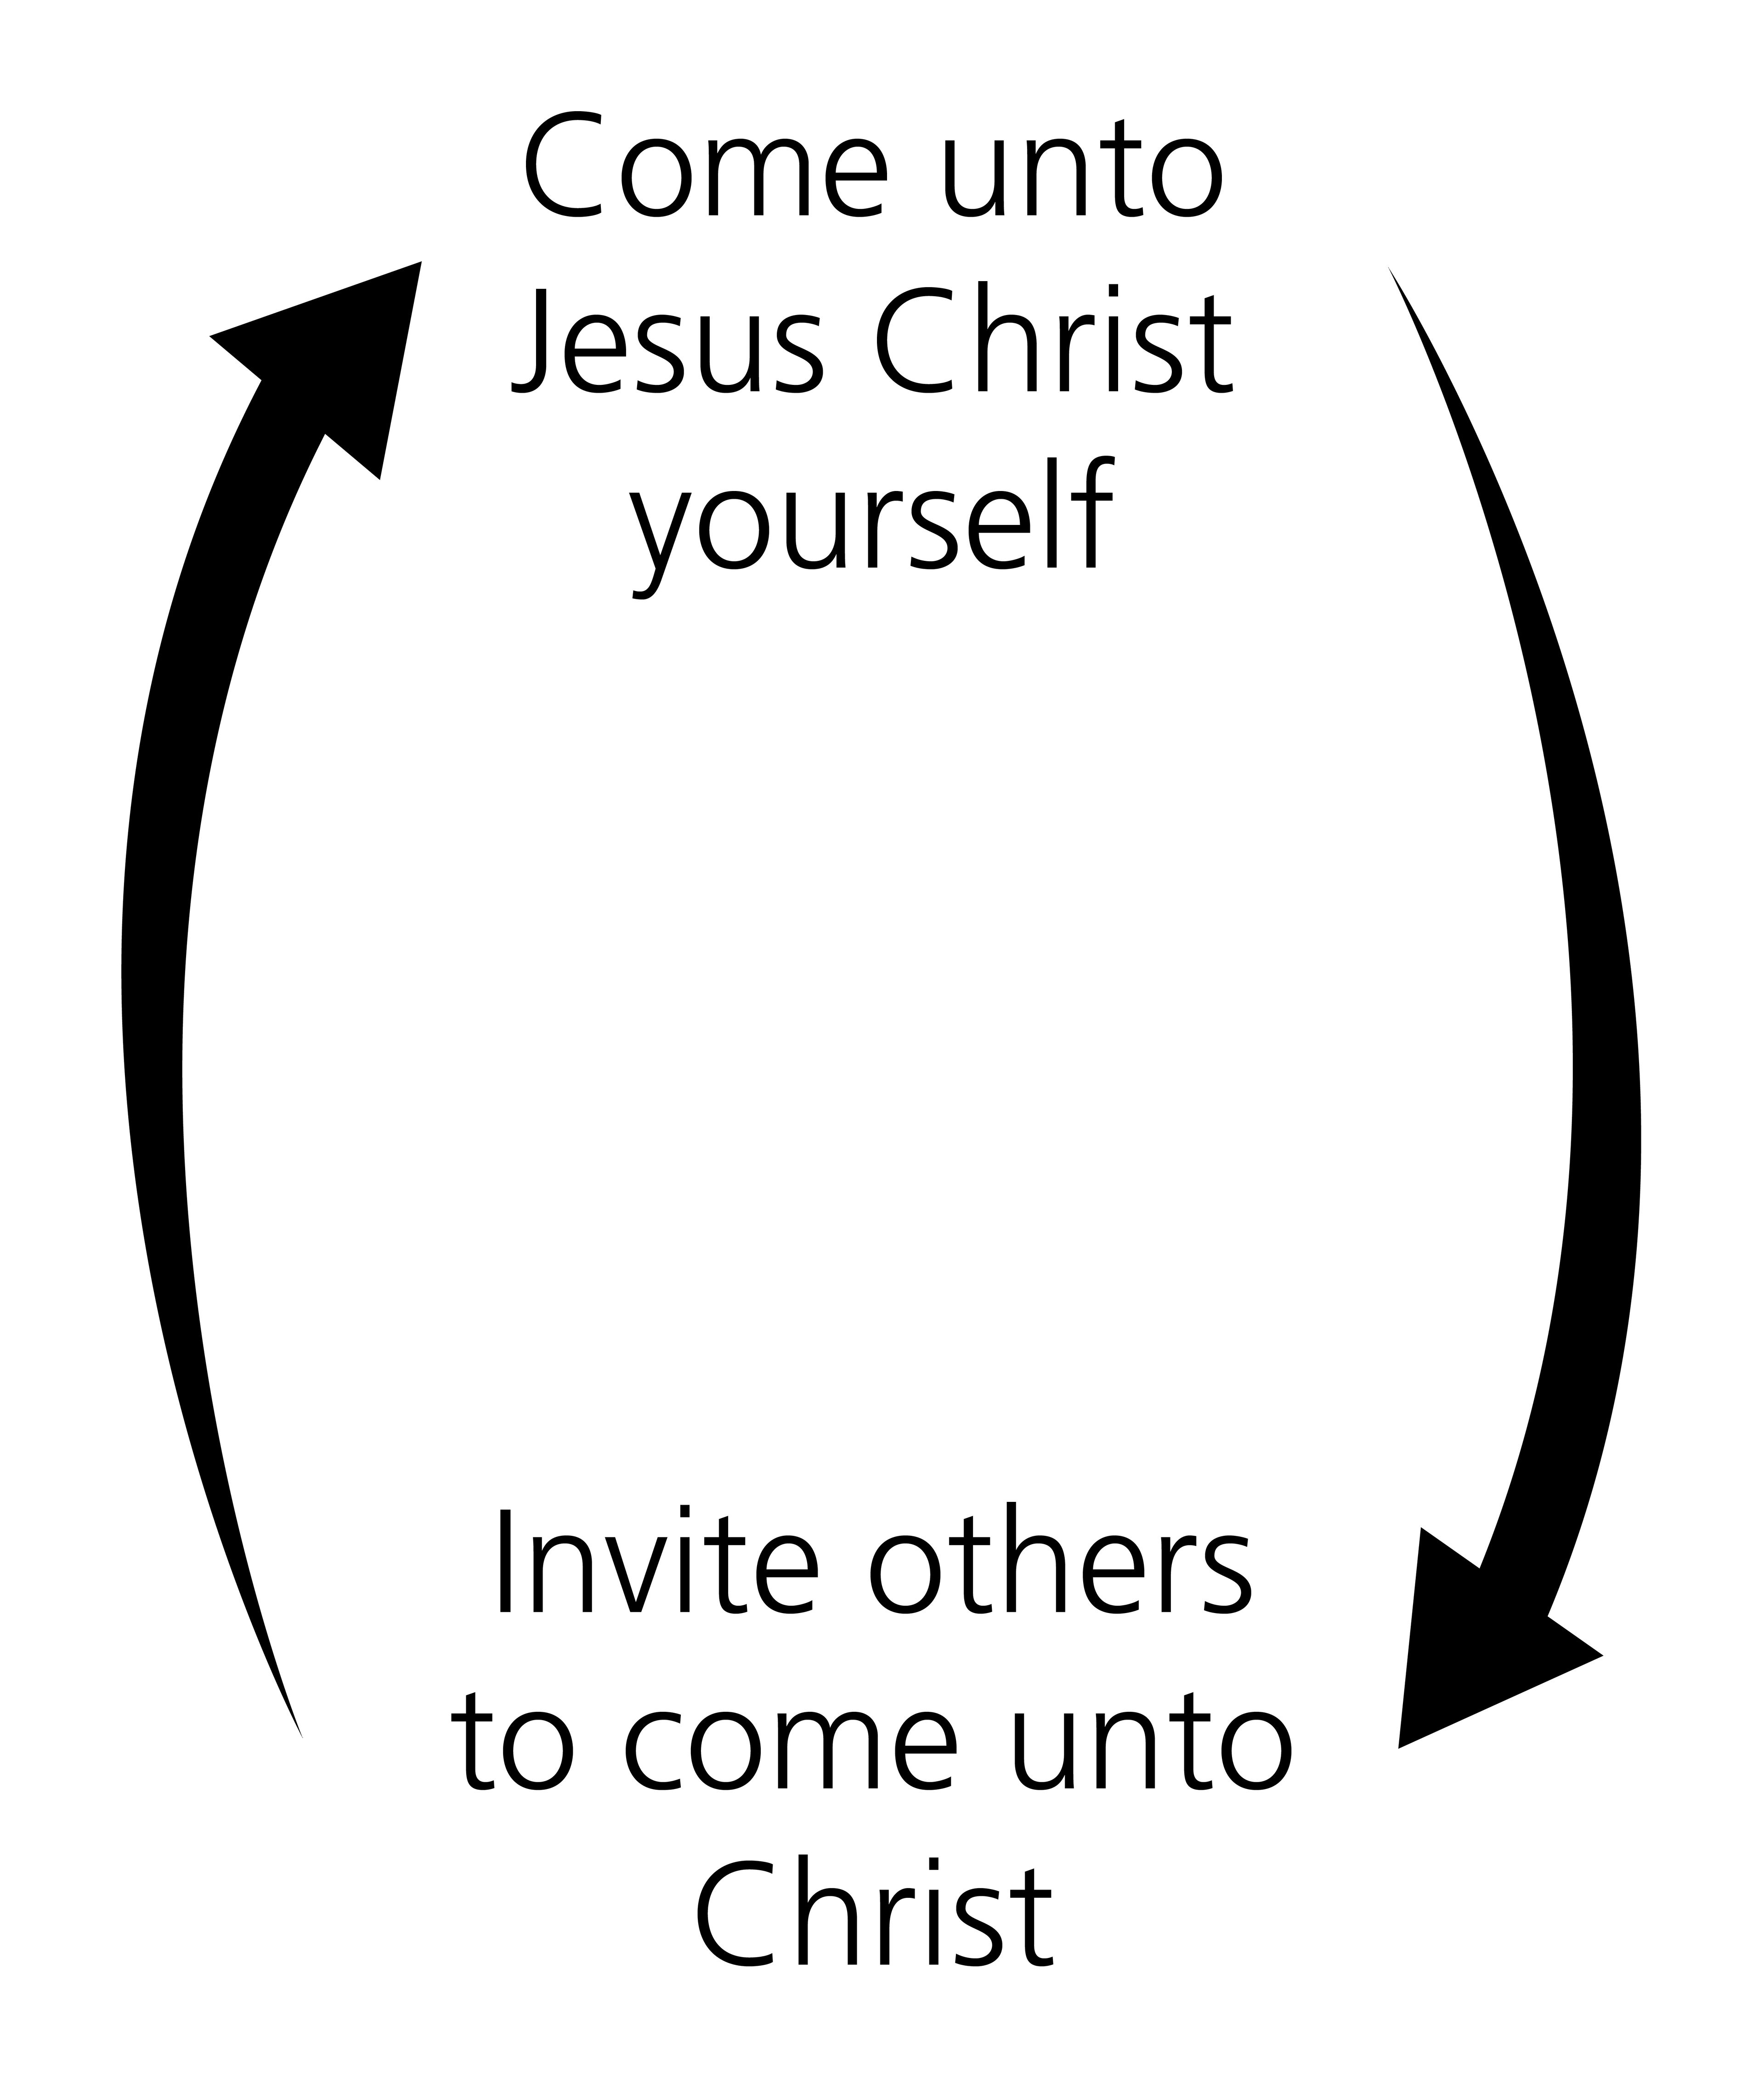 A diagram outlining how we can come closer to Christ by bringing others to Him.